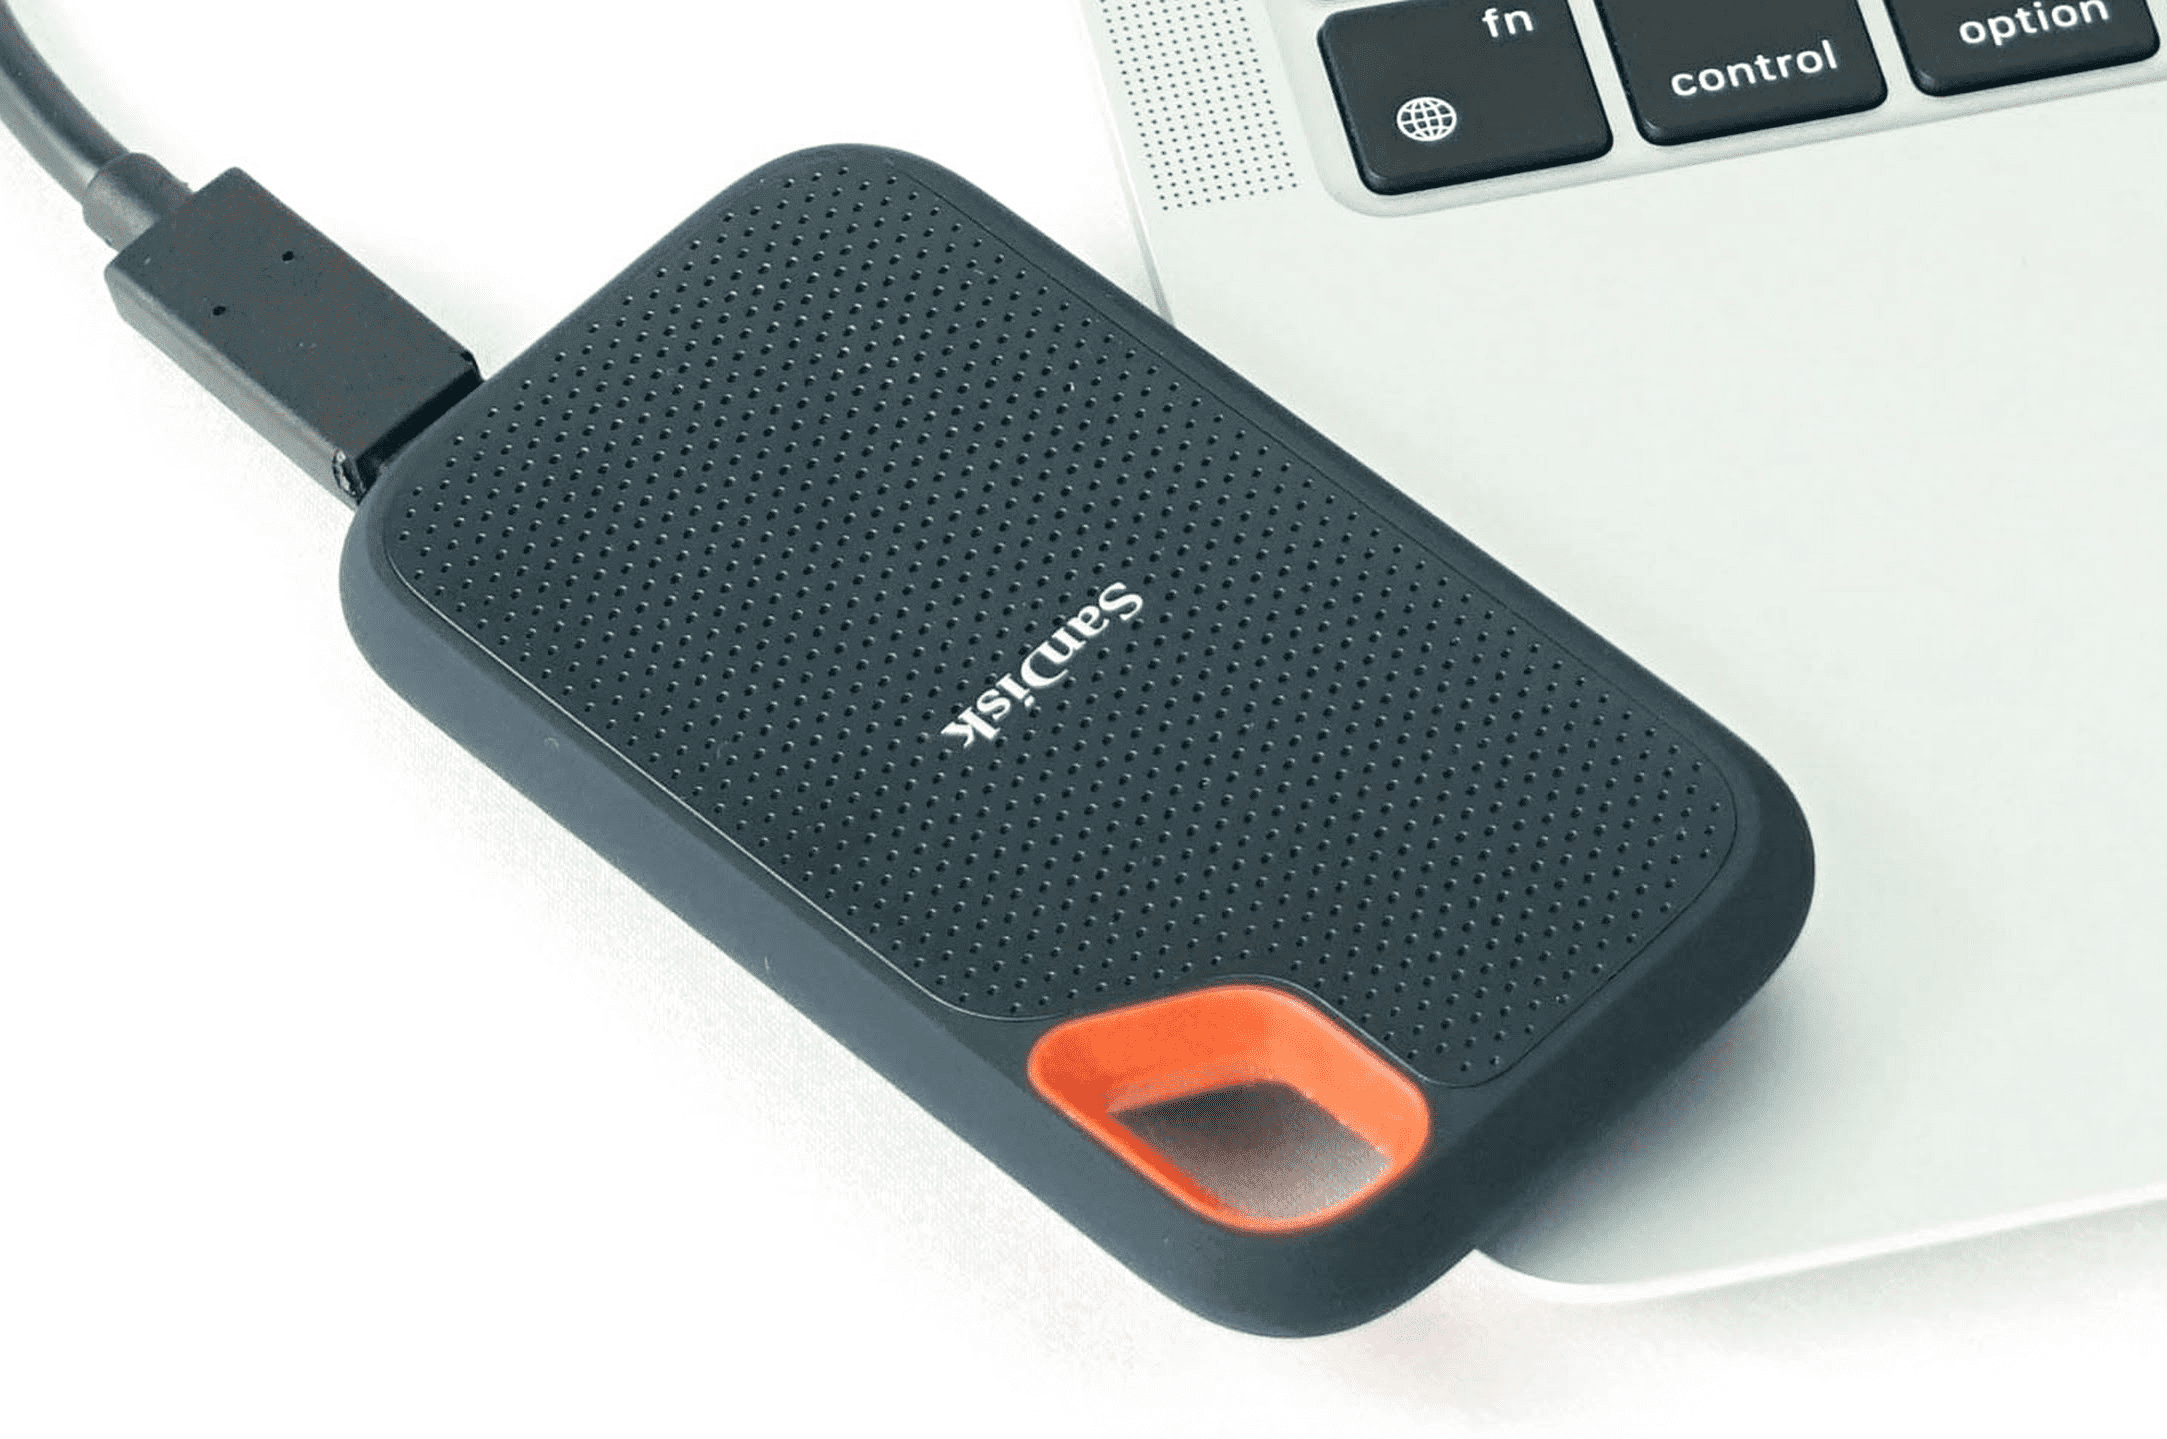 Sandisk SSD Data Recovery